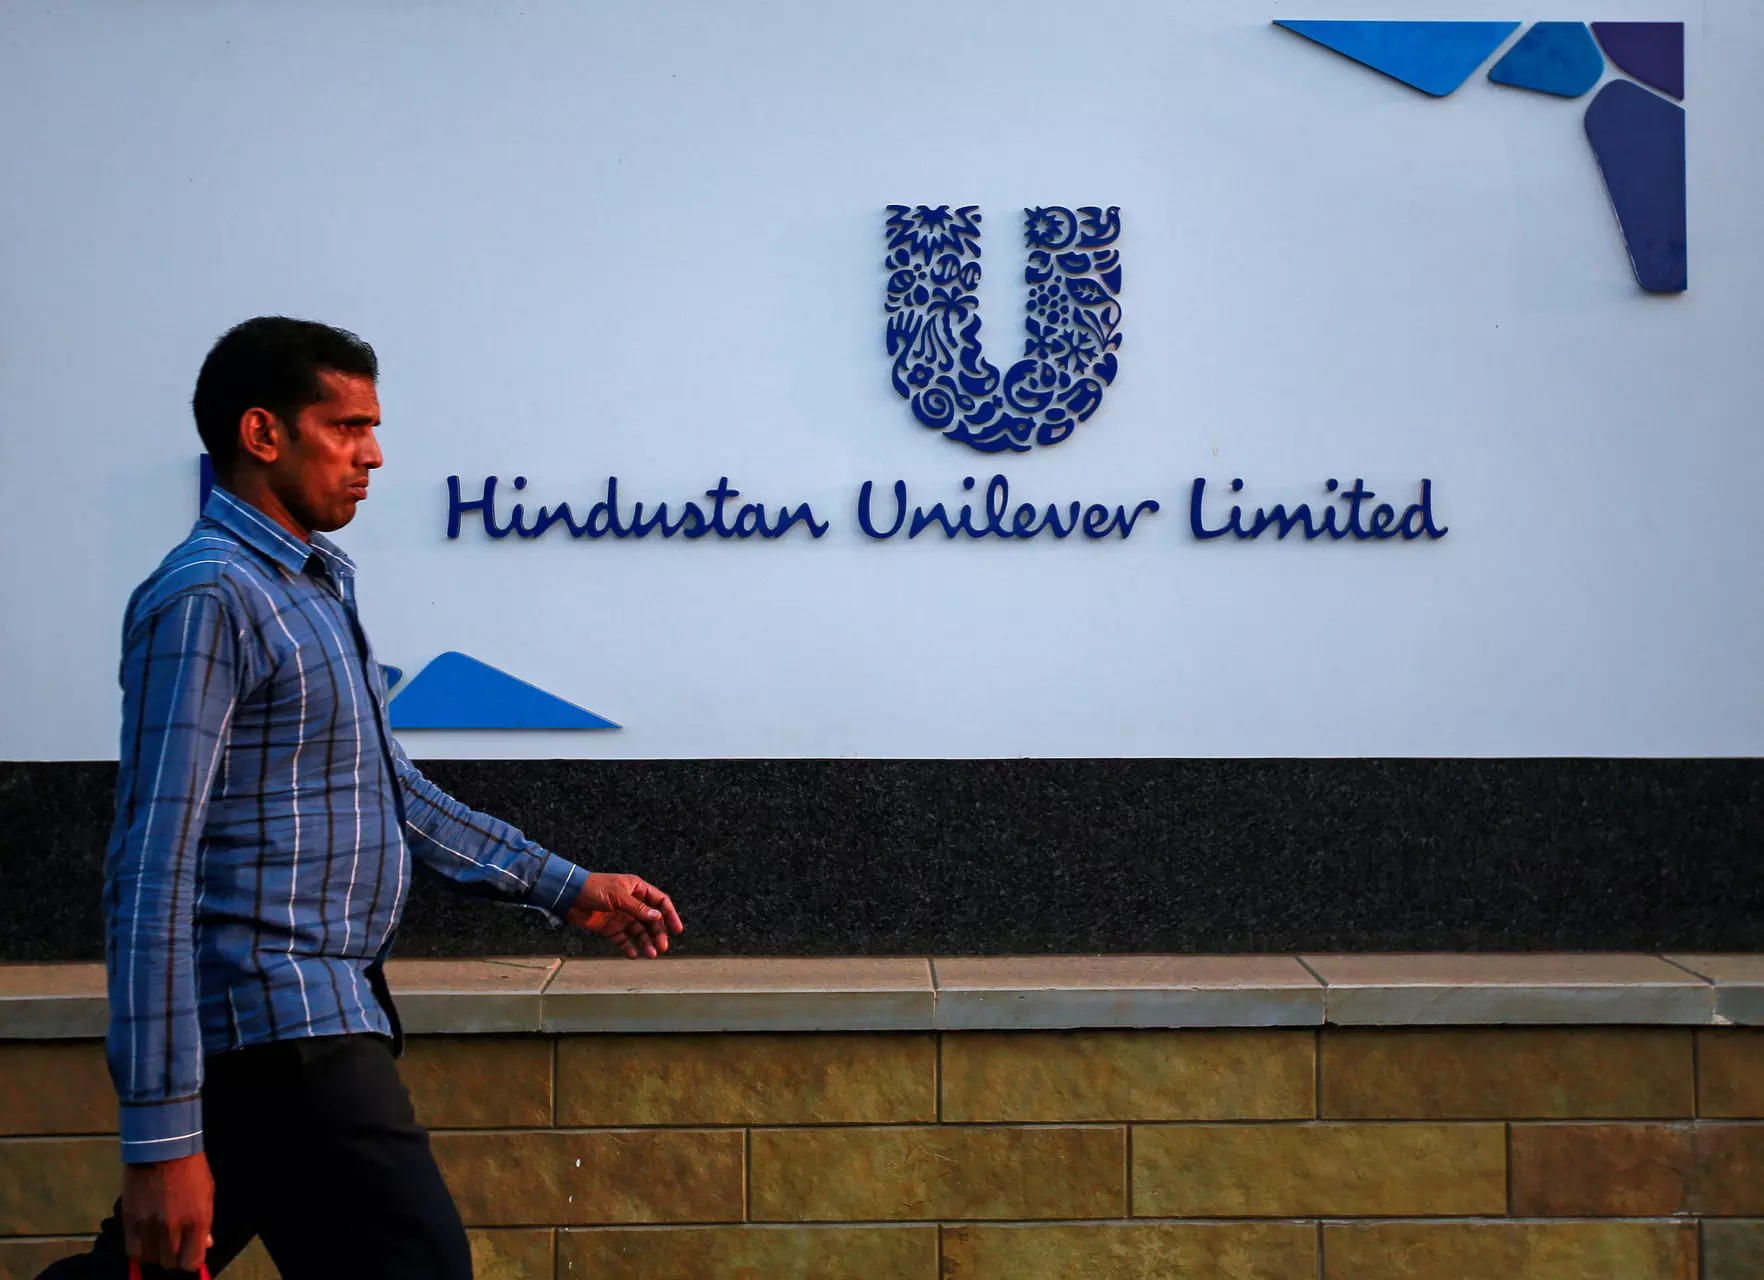 Price cuts in India hit Unilever's growth in soaps, laundry space 